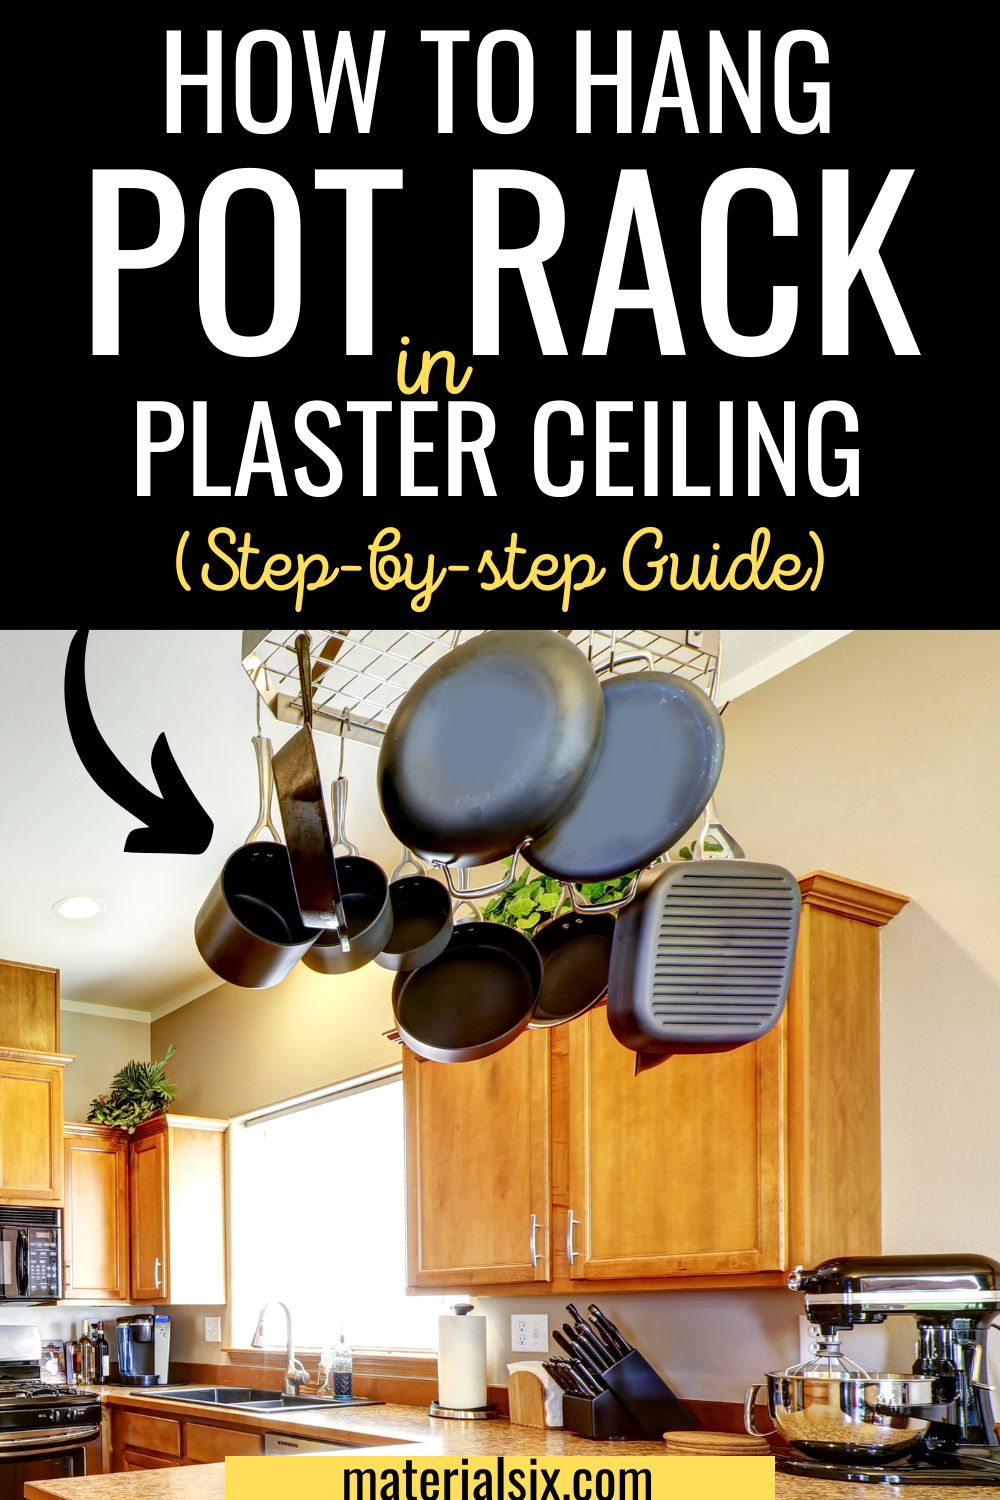 How to Hang Pot Rack in Plaster Ceiling